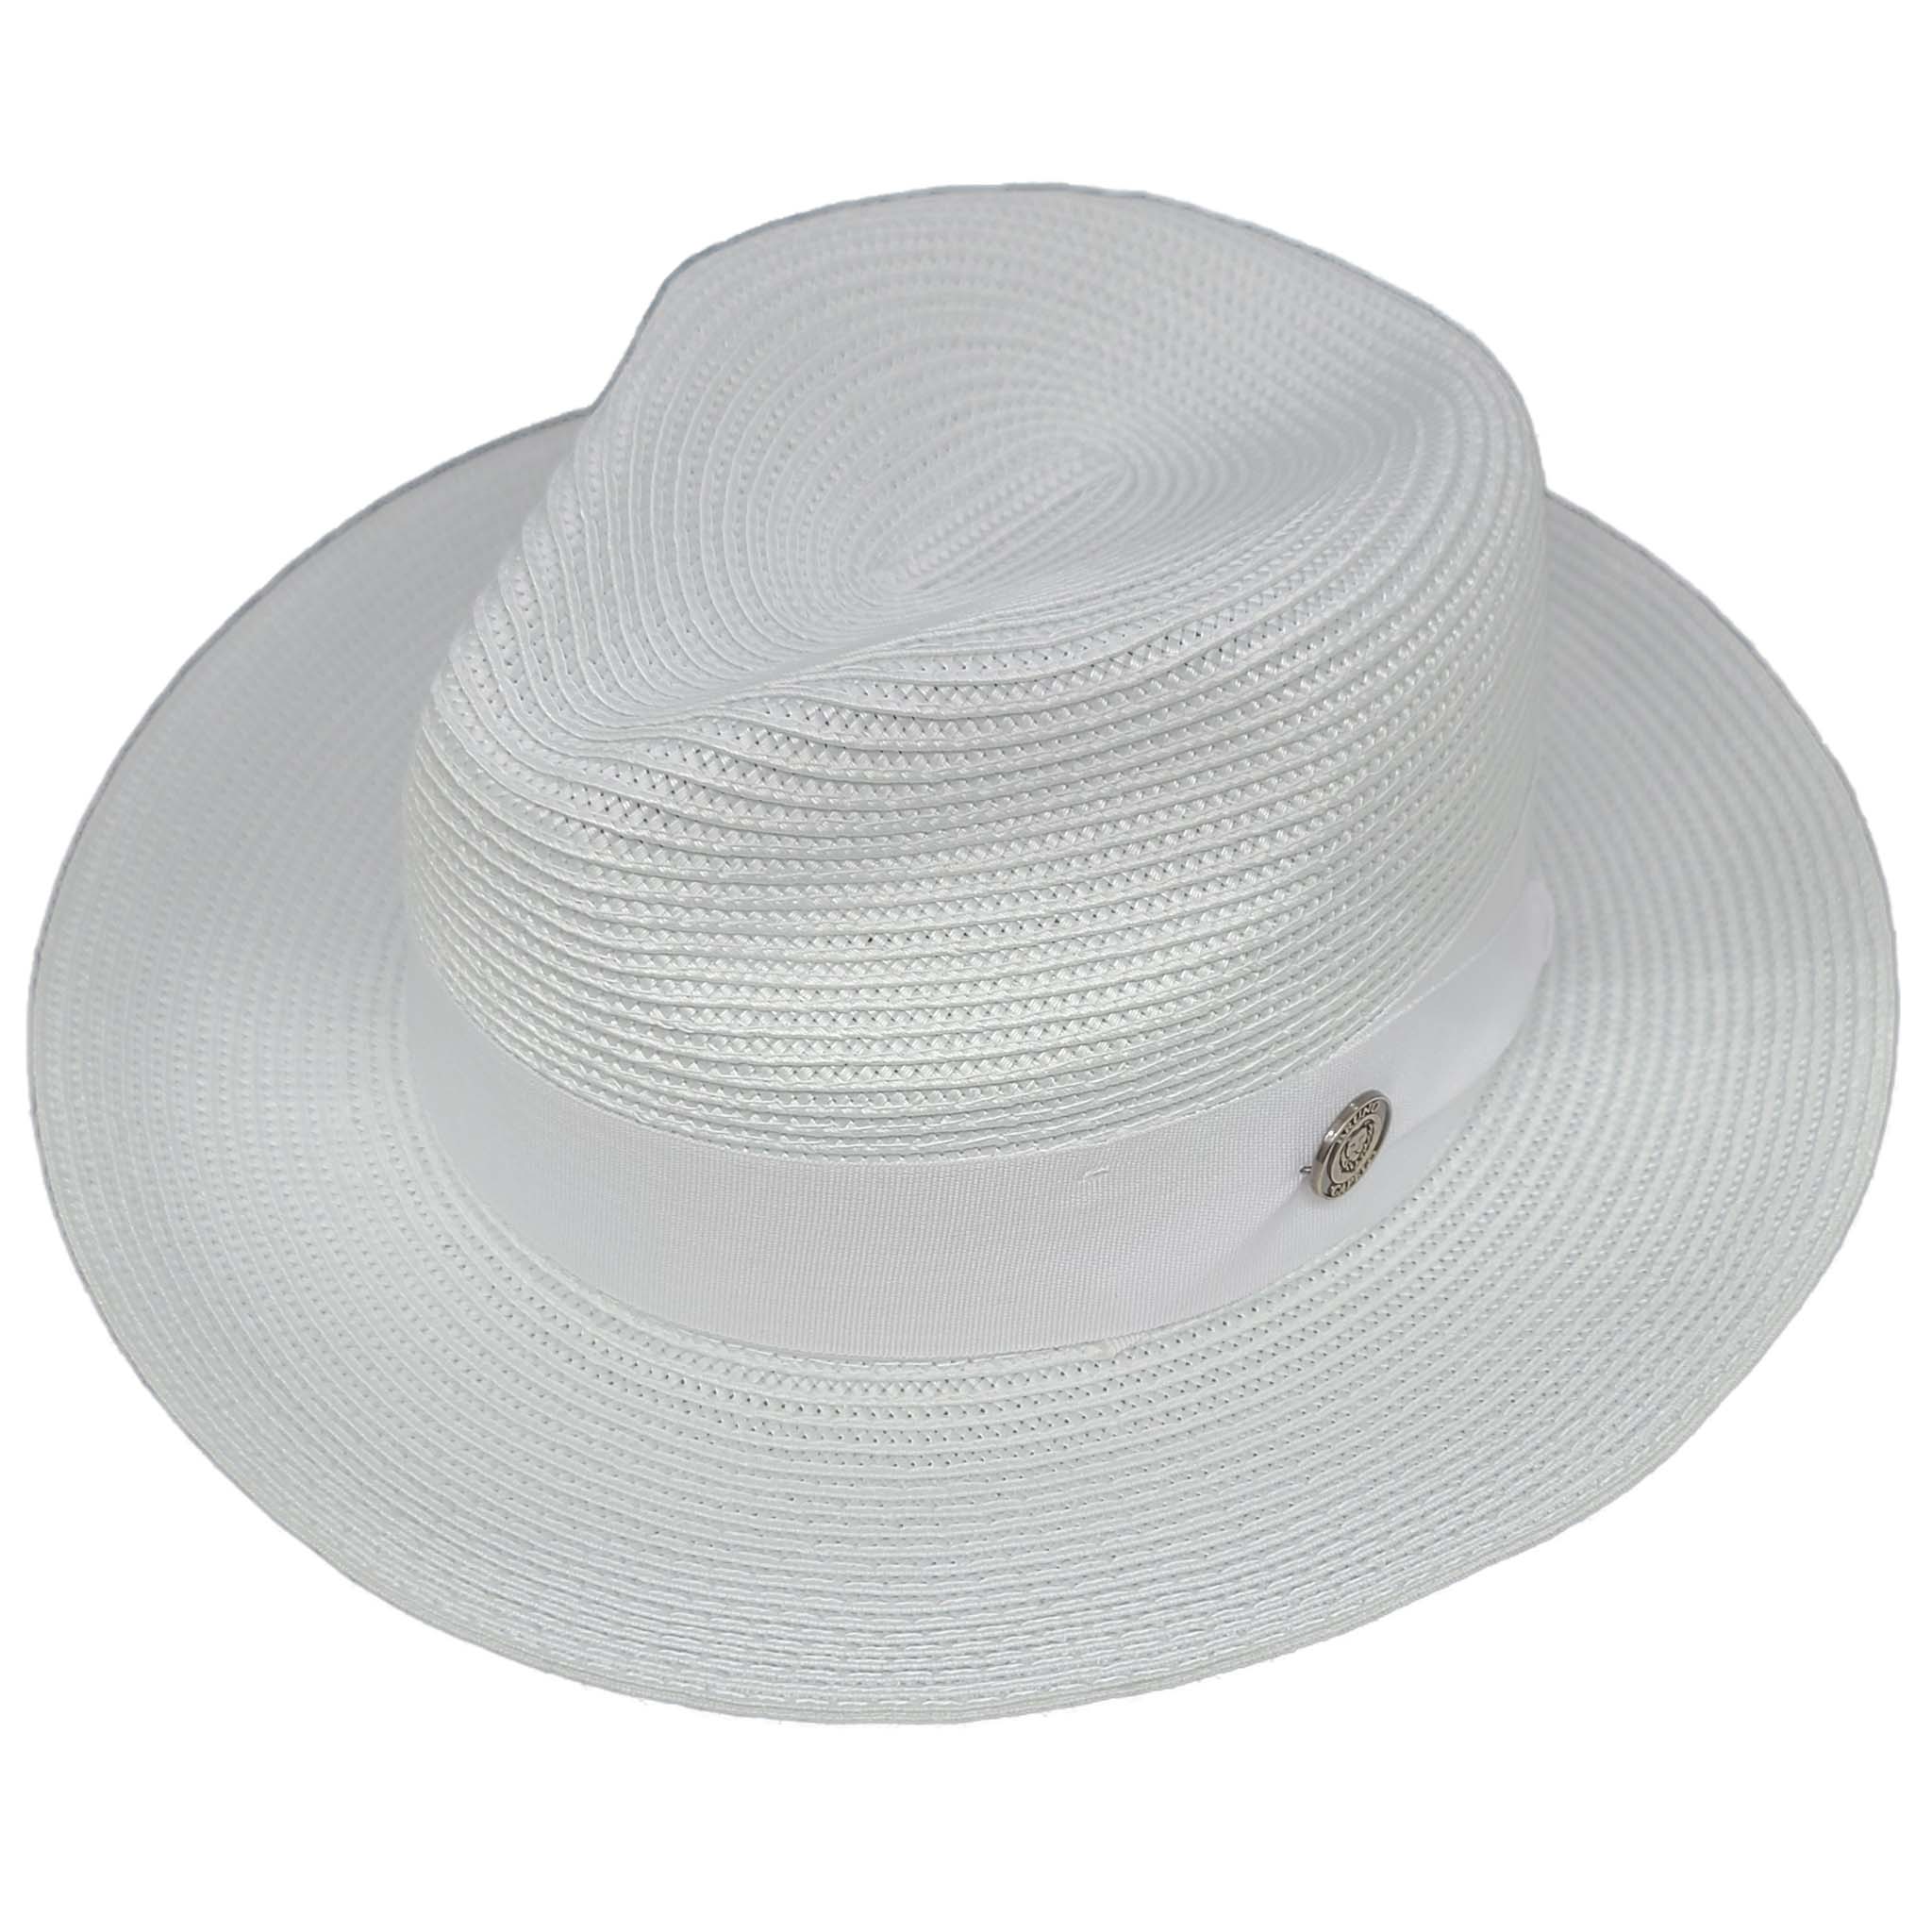 Men's and Women's White Fedora Hat - High-quality, lightweight, and comfortable hat, ideal for summer weddings, beach outings, and other occasions.